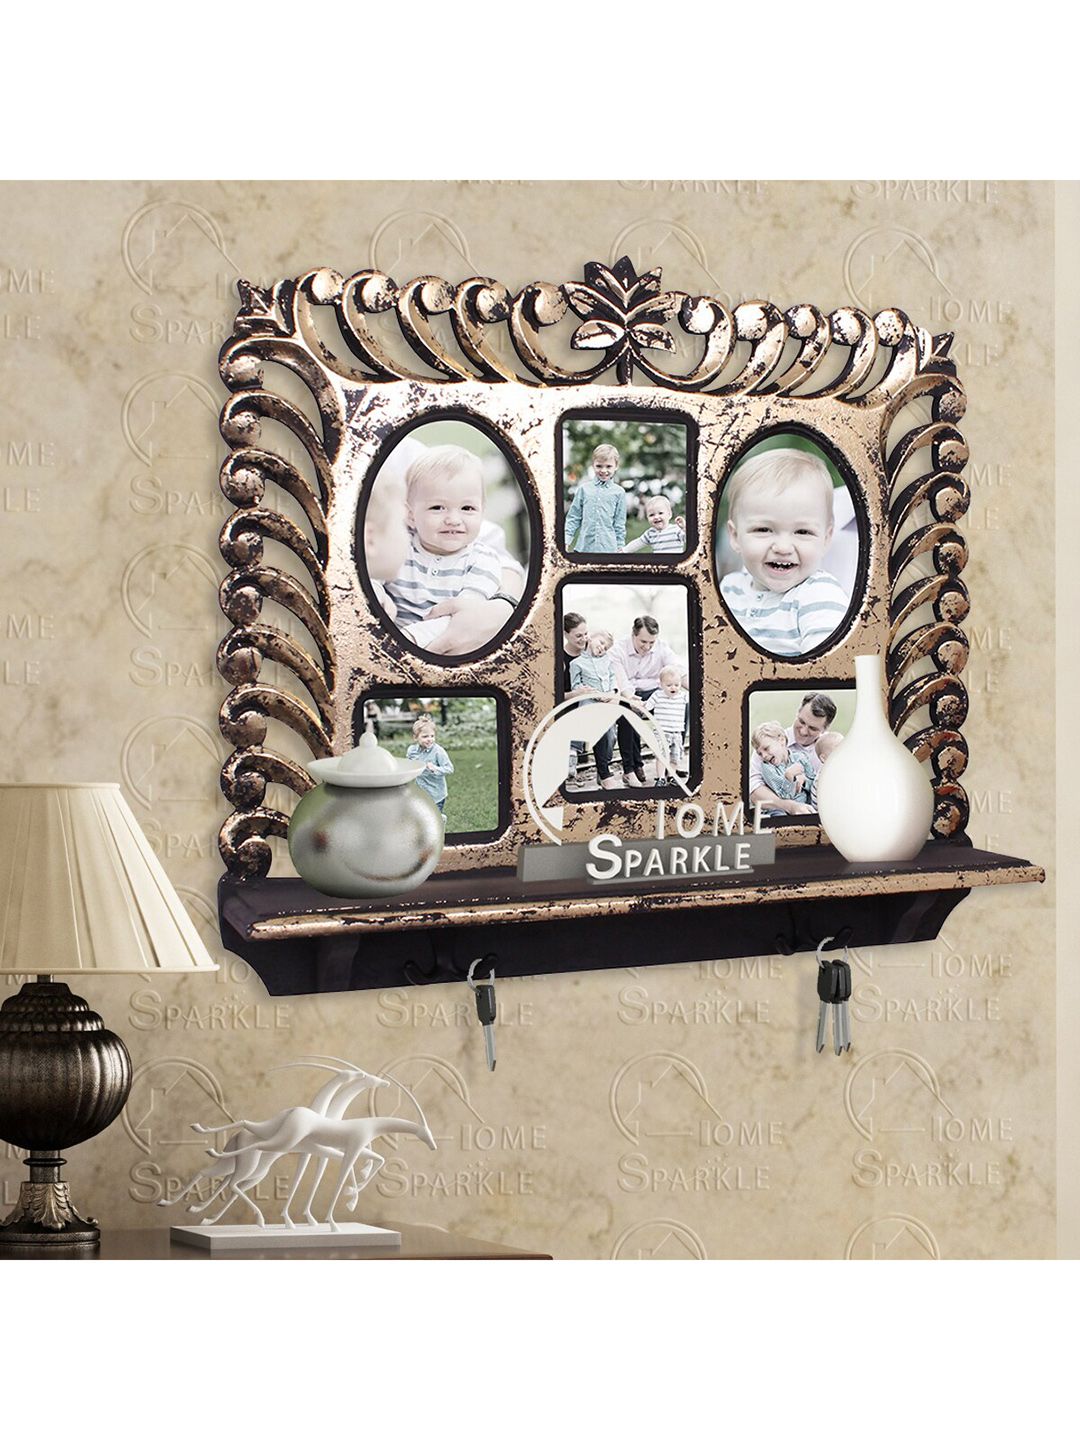 Home Sparkle Wood Wall Shelf with Keyholders Price in India